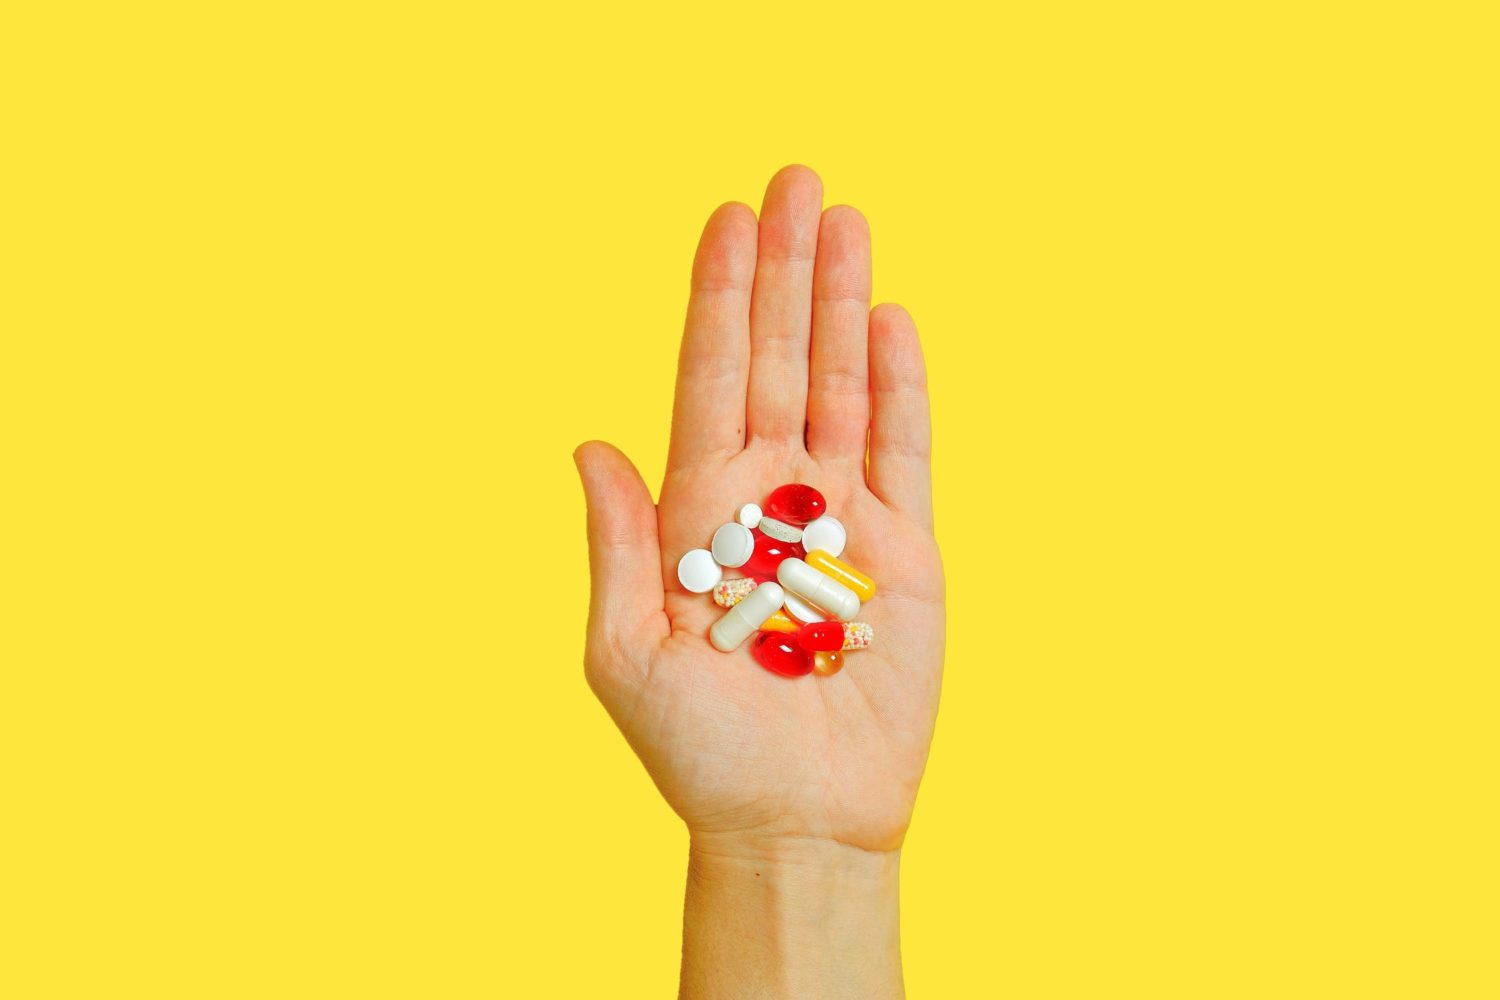 photo of a hand holding several vitamins